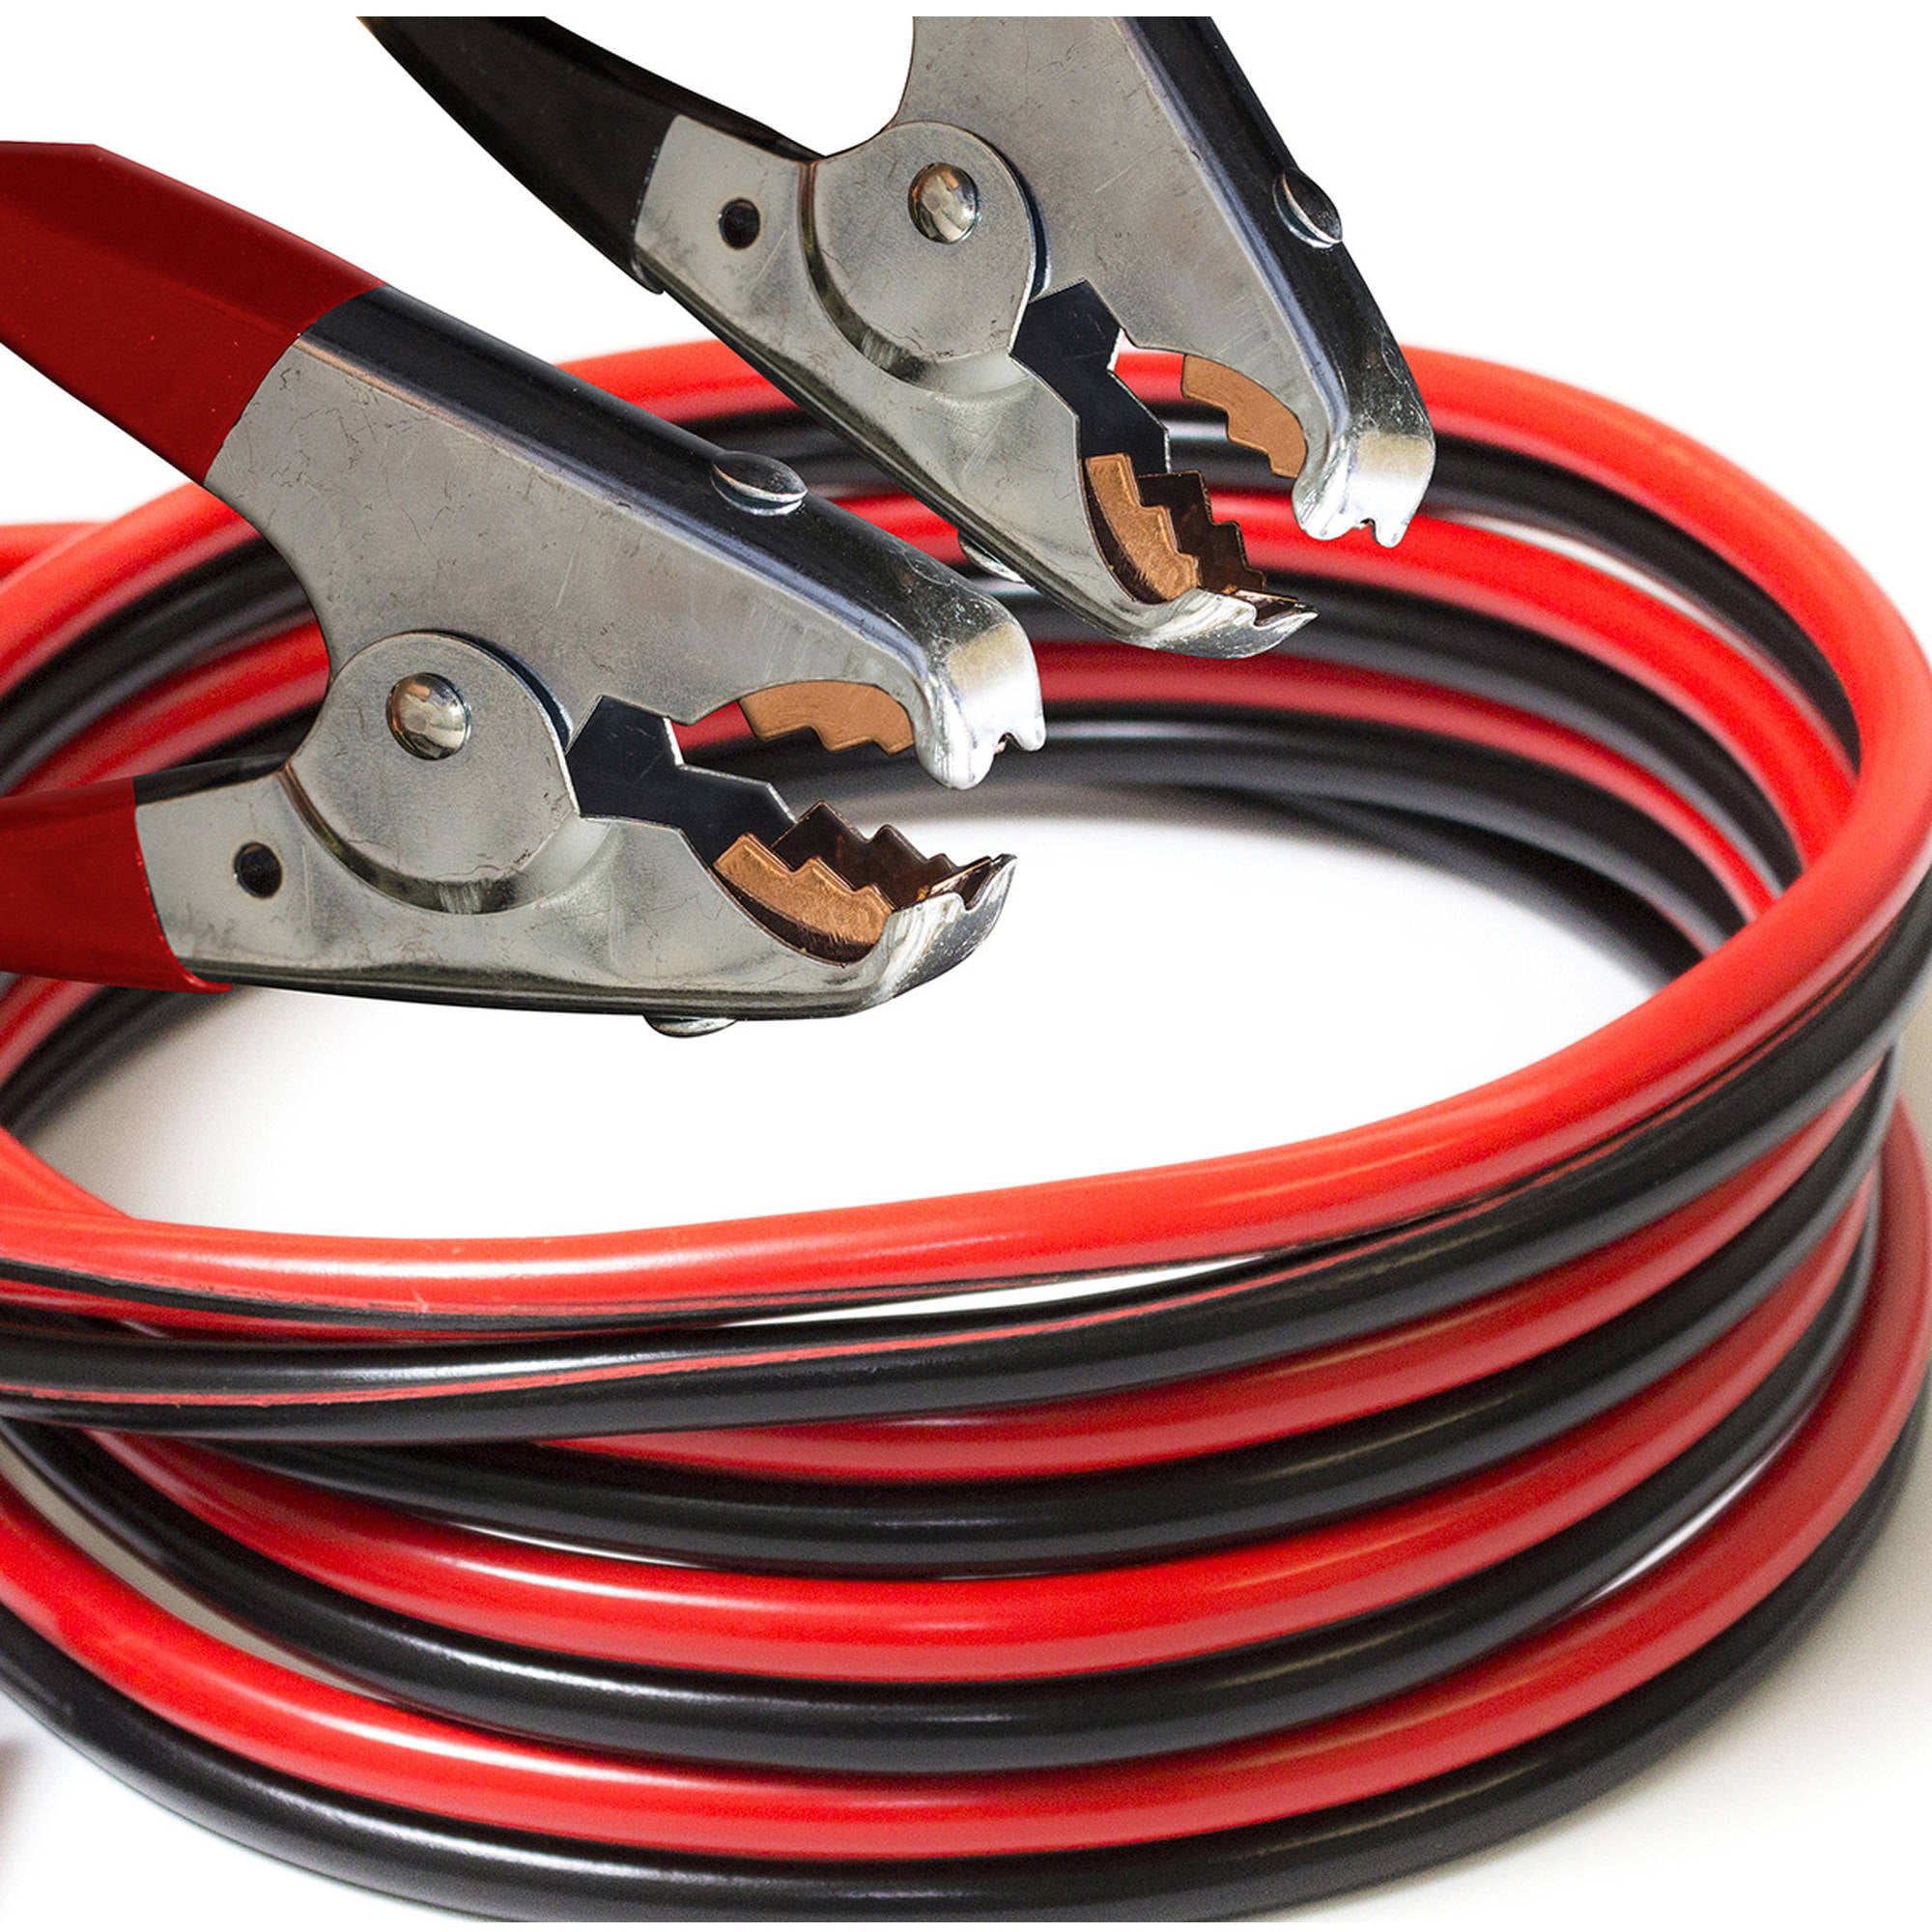 Jumper Cables Spark Free Booster 16 Feet 250 Amp Heavy Duty 6 Gauge 